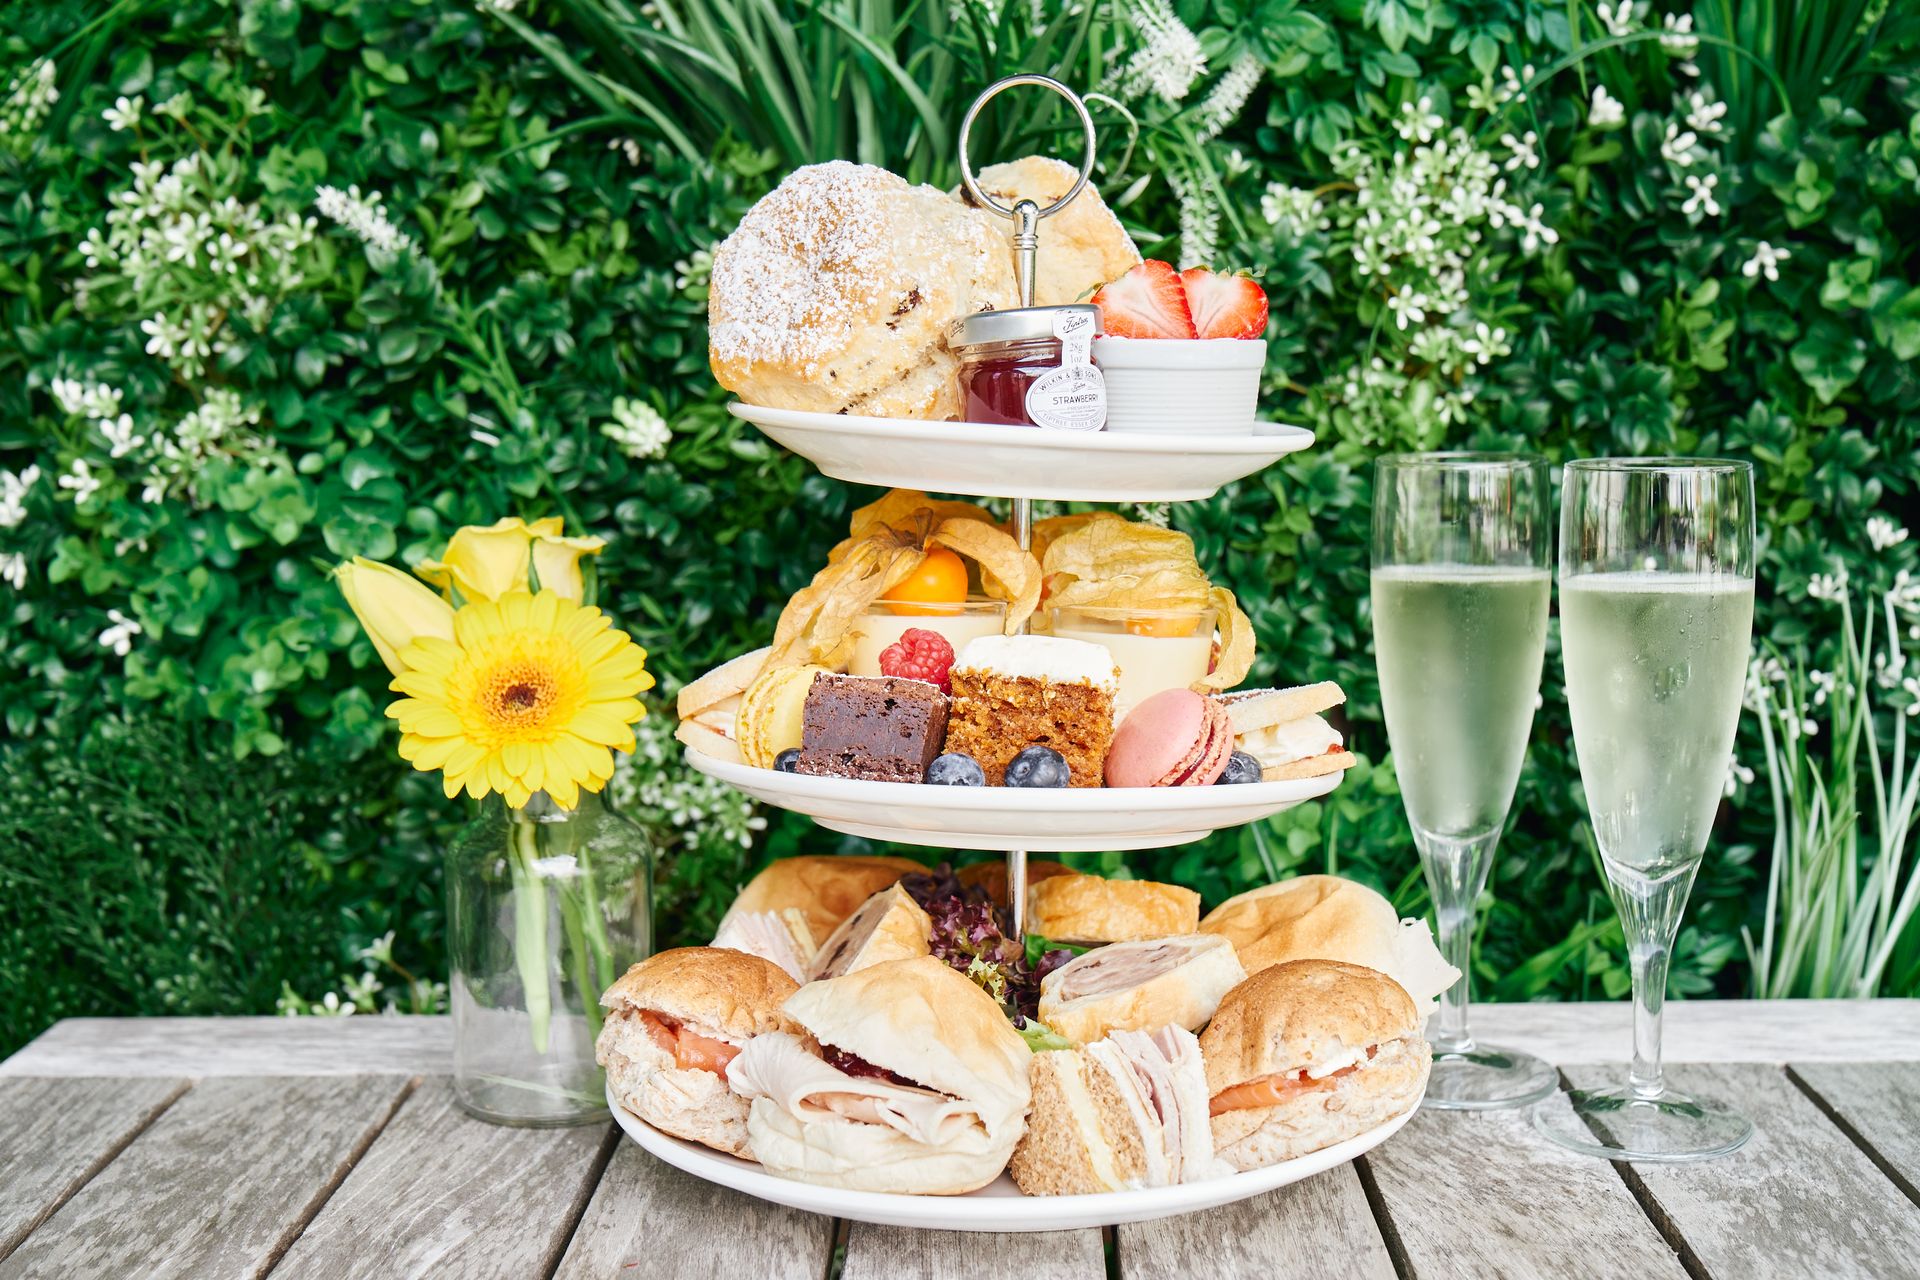 Afternoon Tea Venues In Lancashire The Wrightington Hotel Health Club And Spa